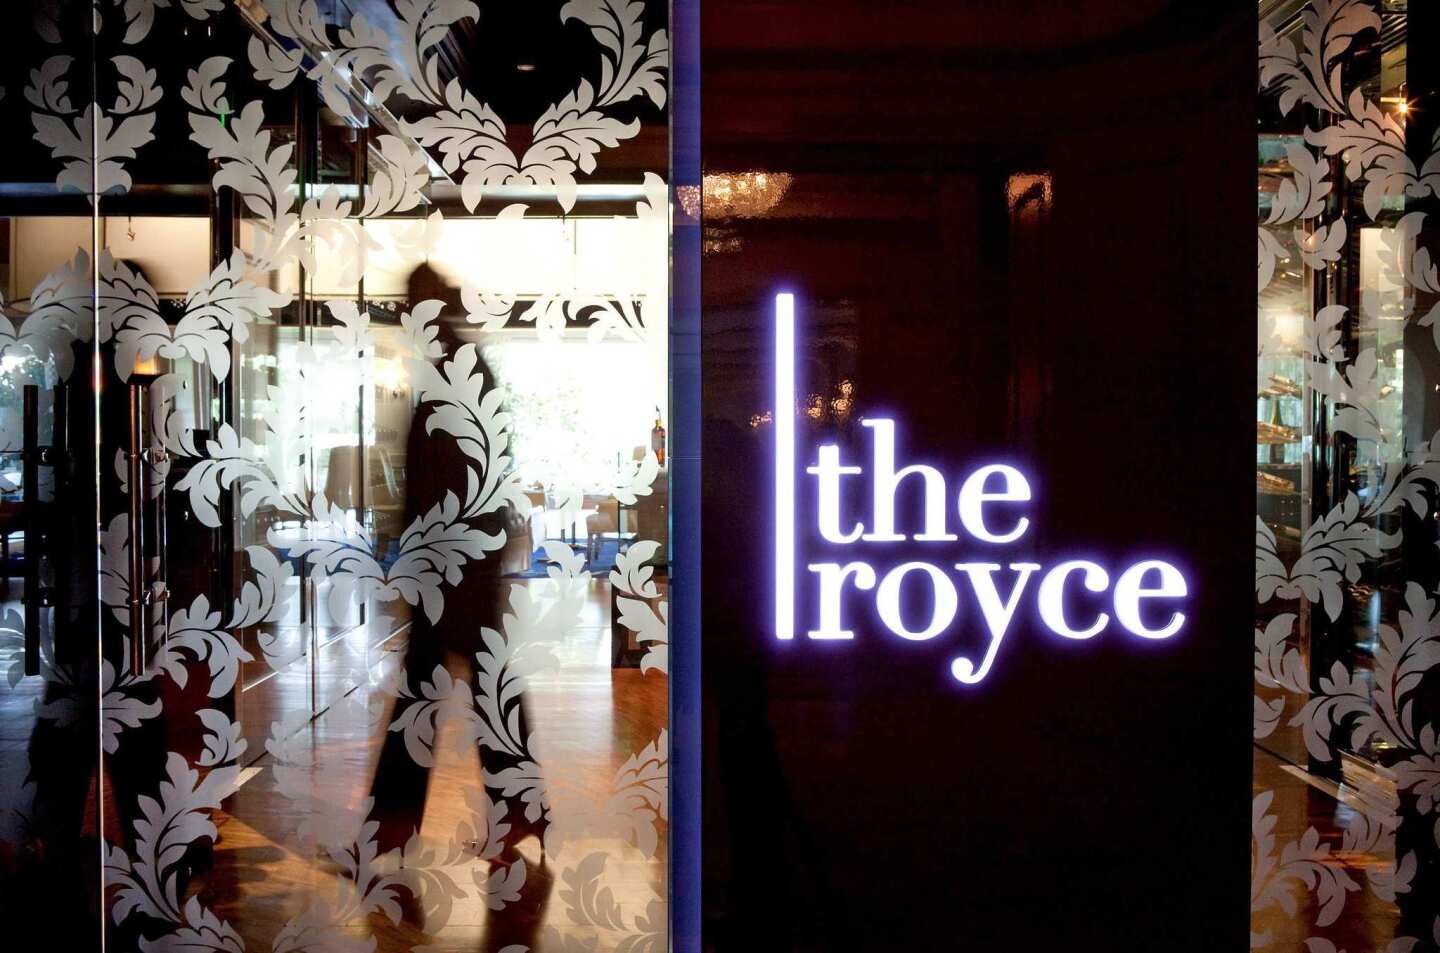 Entering the Royce in the Langham Huntington Pasadena hotel is to walk into luxury.